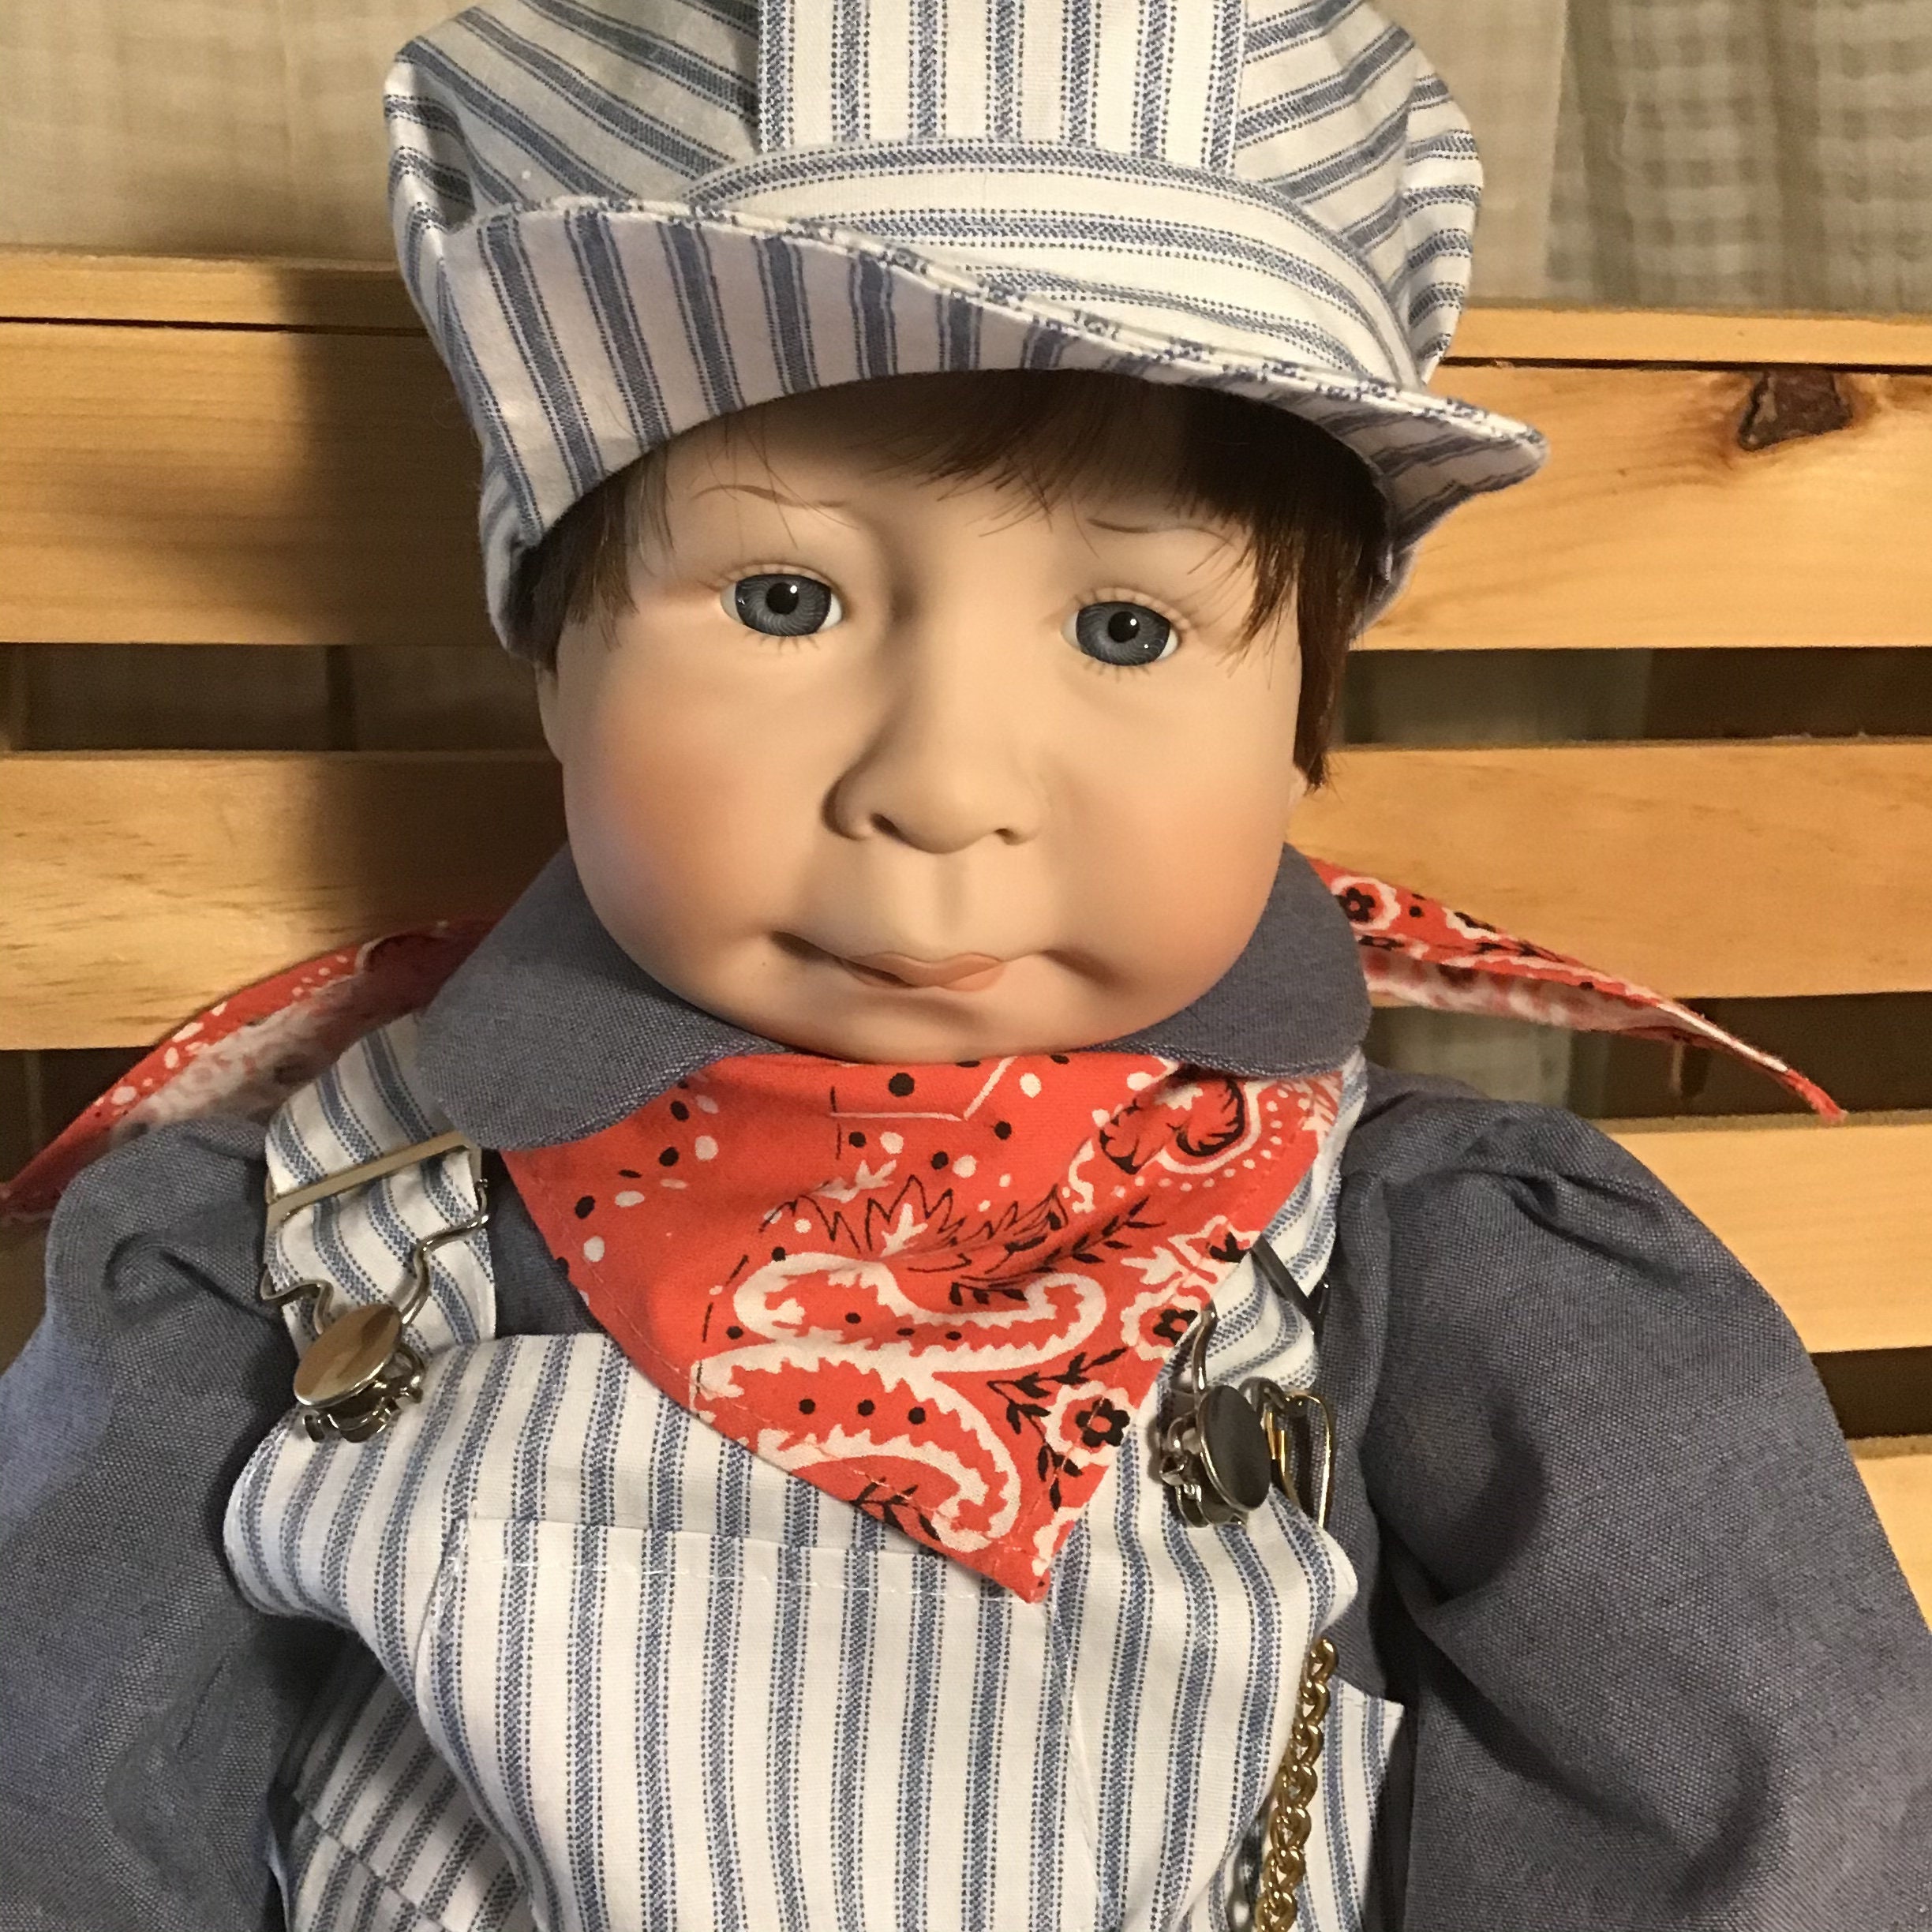 CHUBB 23" RAILROAD CONDUCTOR BUBBA CHUBBS DOLL HAND SIGNED BY LEE MIDDLETON 1984   39 